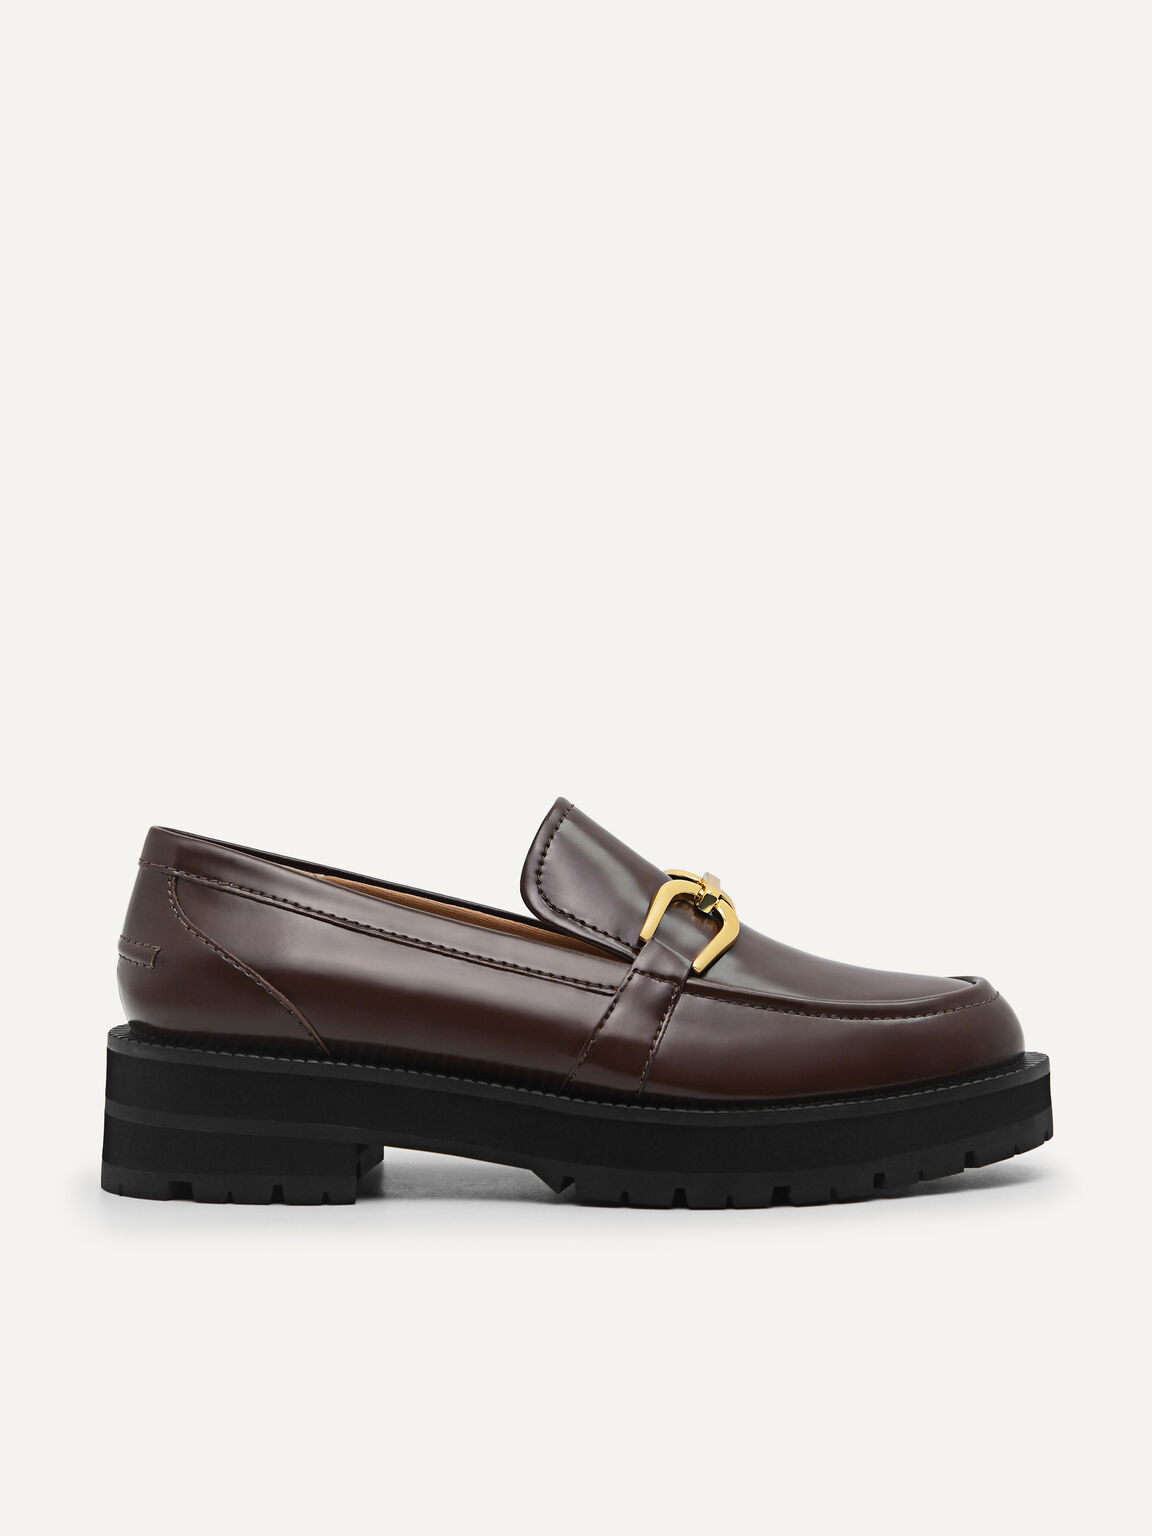 Chunky Loafers with Chain Detail, Dark Brown, hi-res